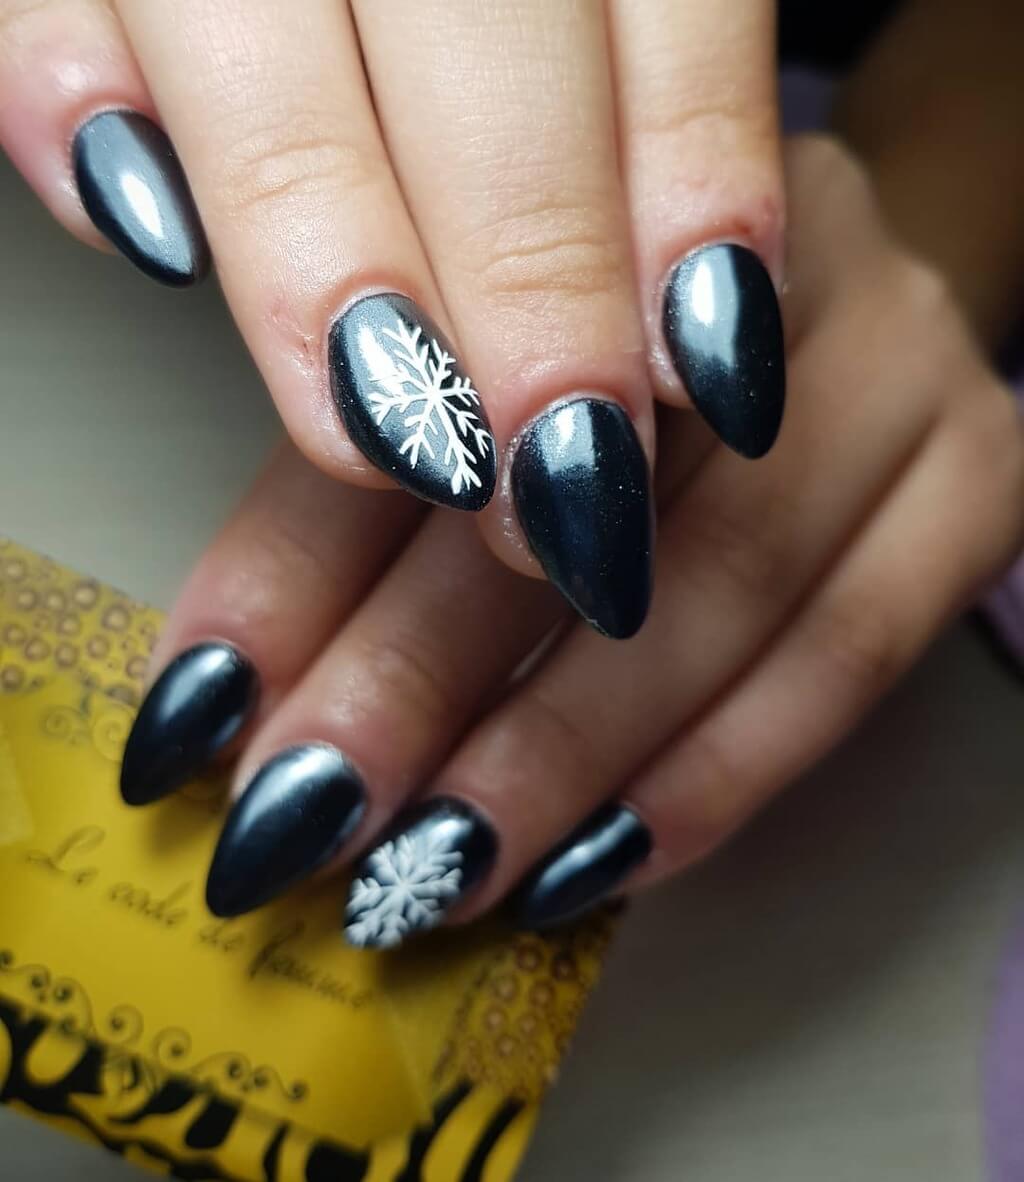 A woman's nails with a snowflake design
